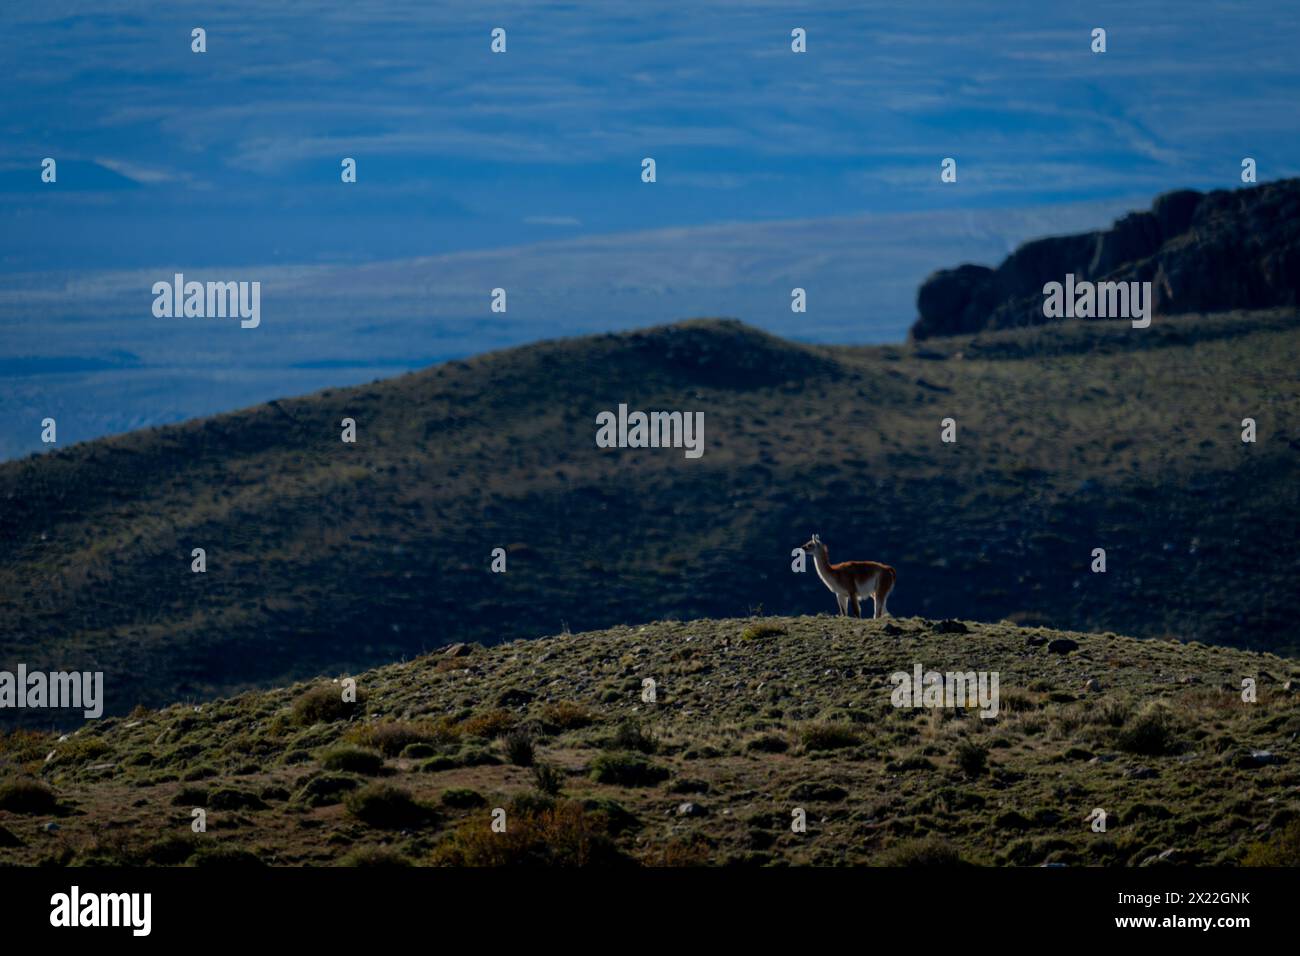 Guanaco standing in profile on grassy mound Stock Photo